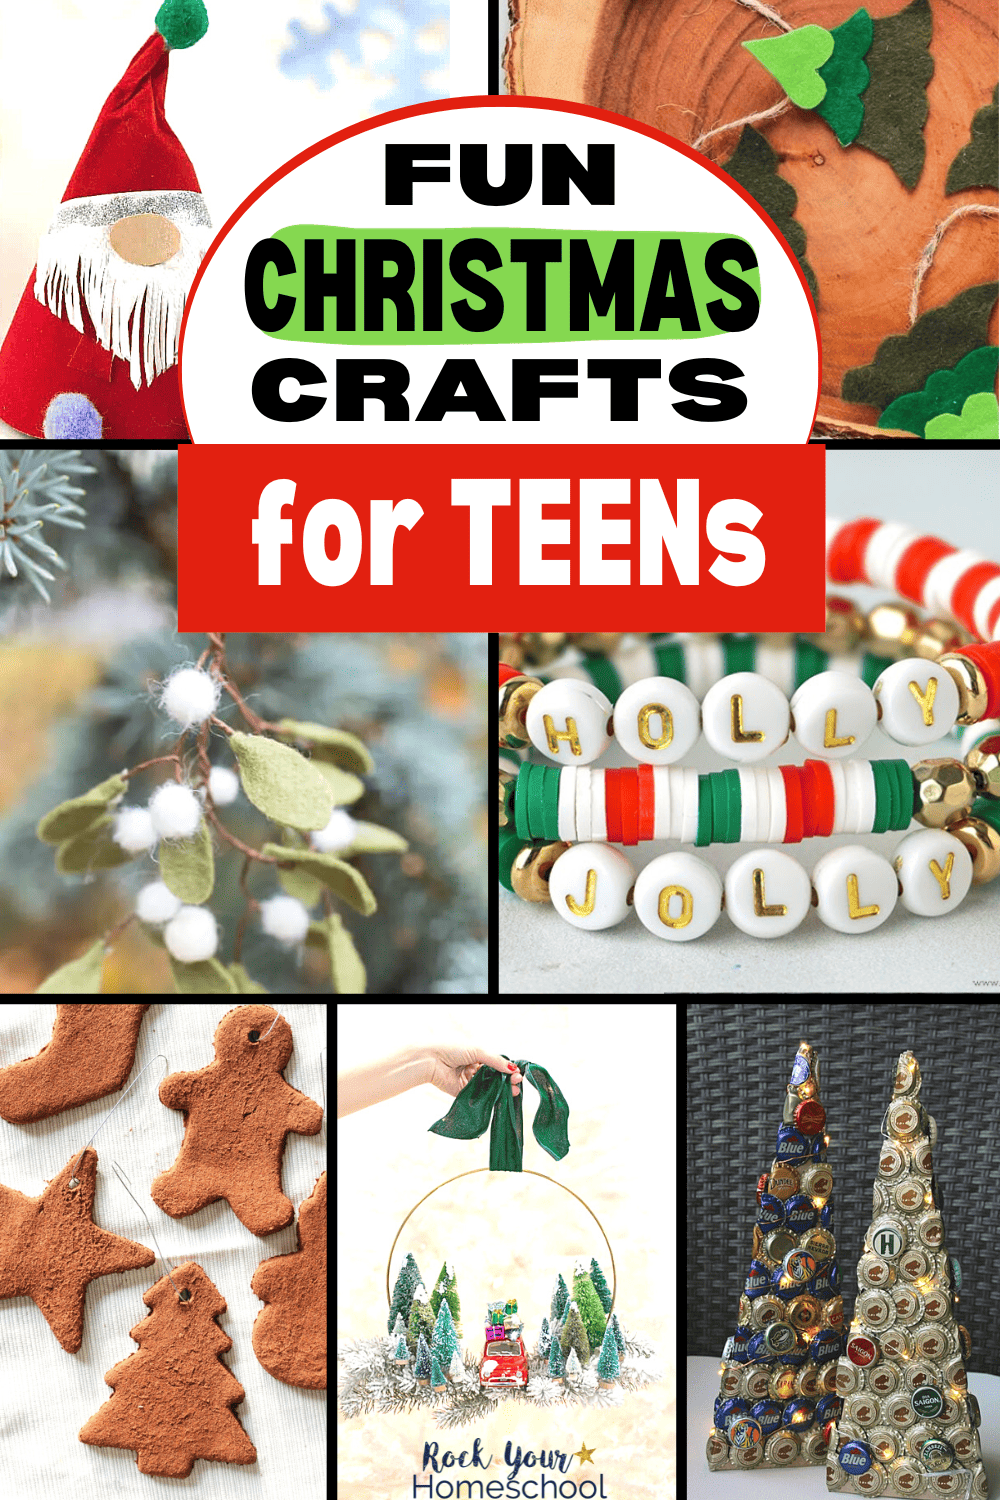 Christmas Crafts for Teens: 14 Festive Ideas for DIY Holiday Fun